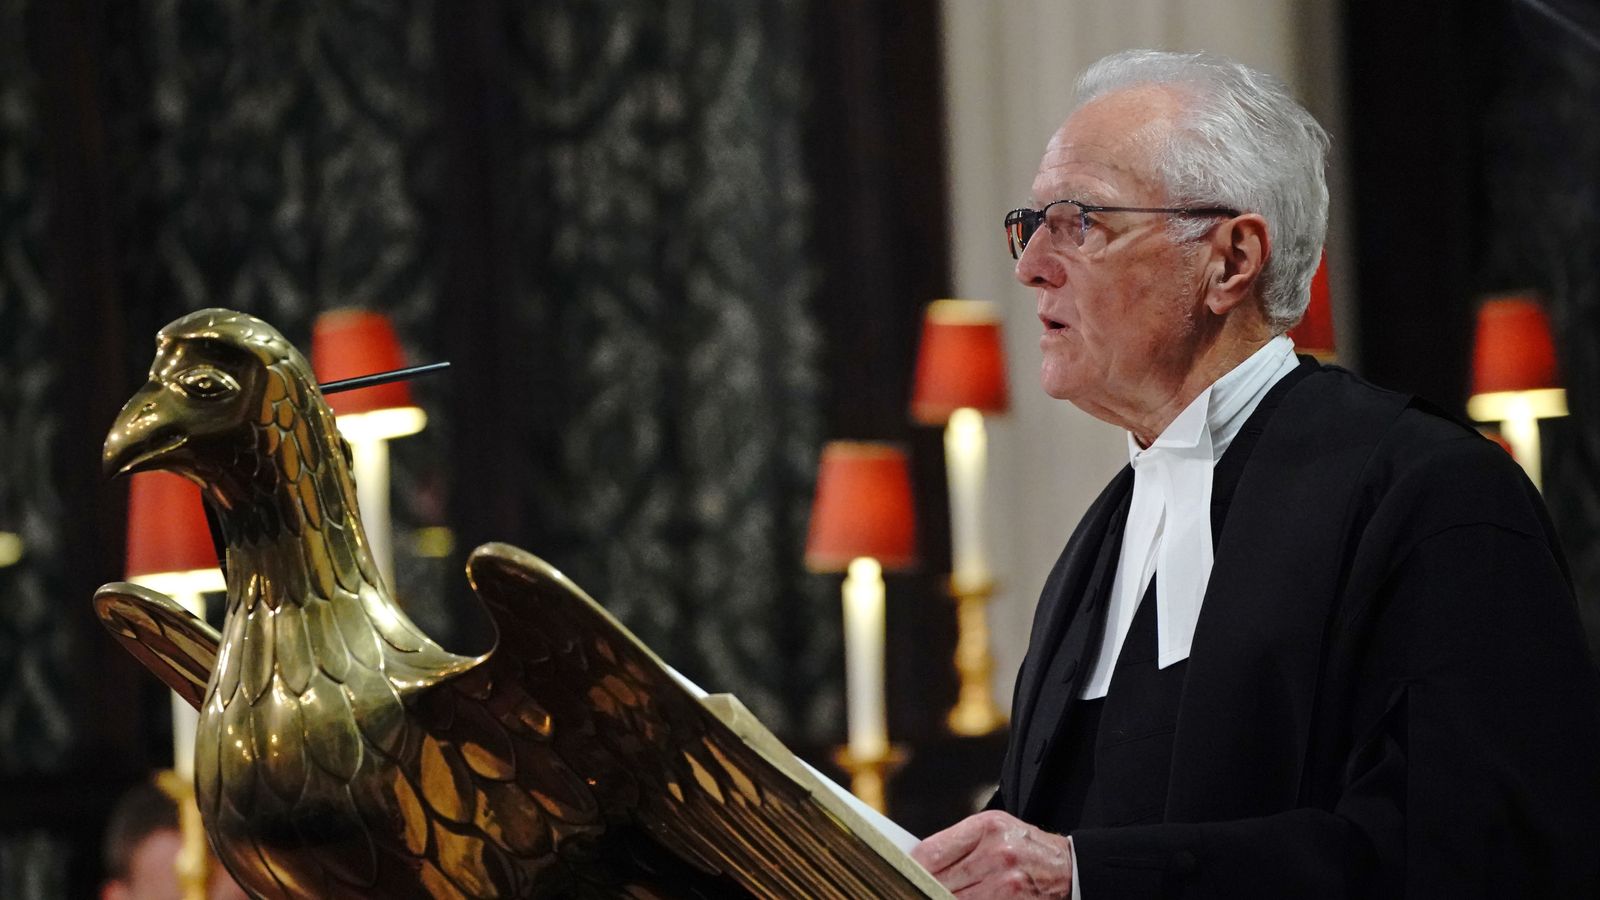 Abolishing House of Lords would spark 'fundamental challenges', Speaker warns